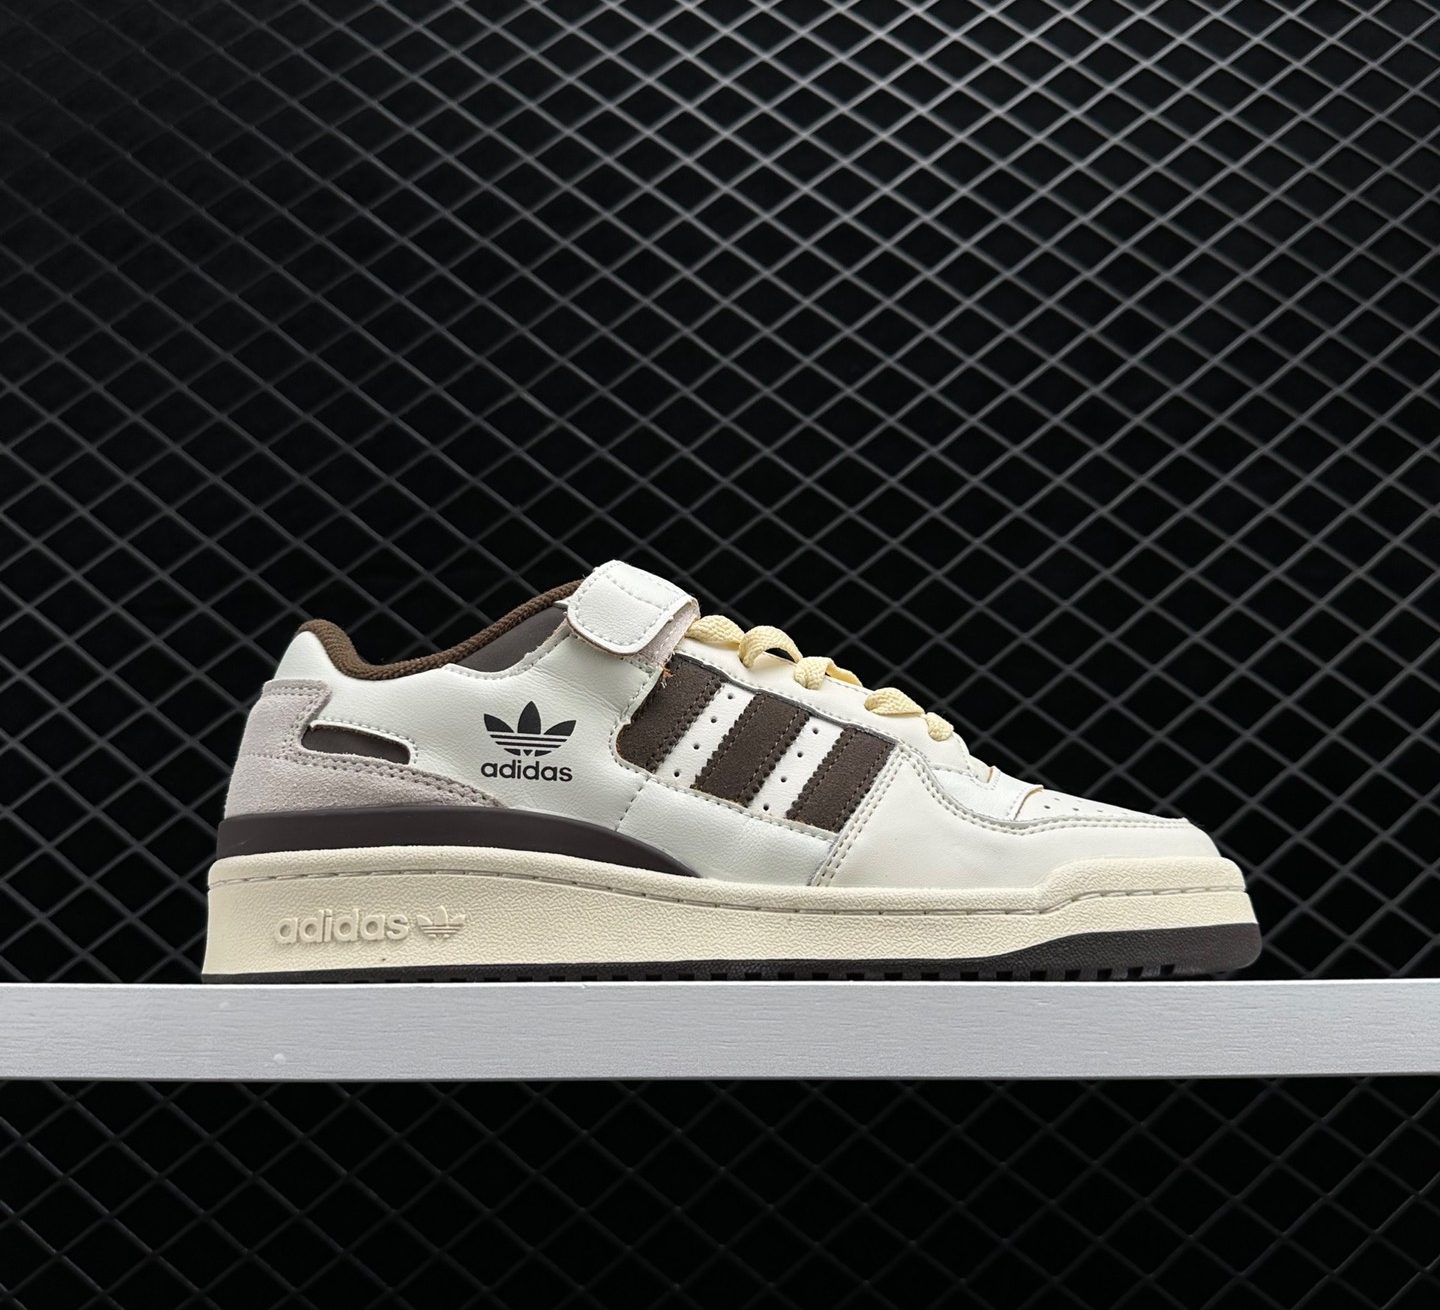 Adidas Forum 84 Low 'Off White Brown' GX4567 - Premium Sneakers for Style and Comfort